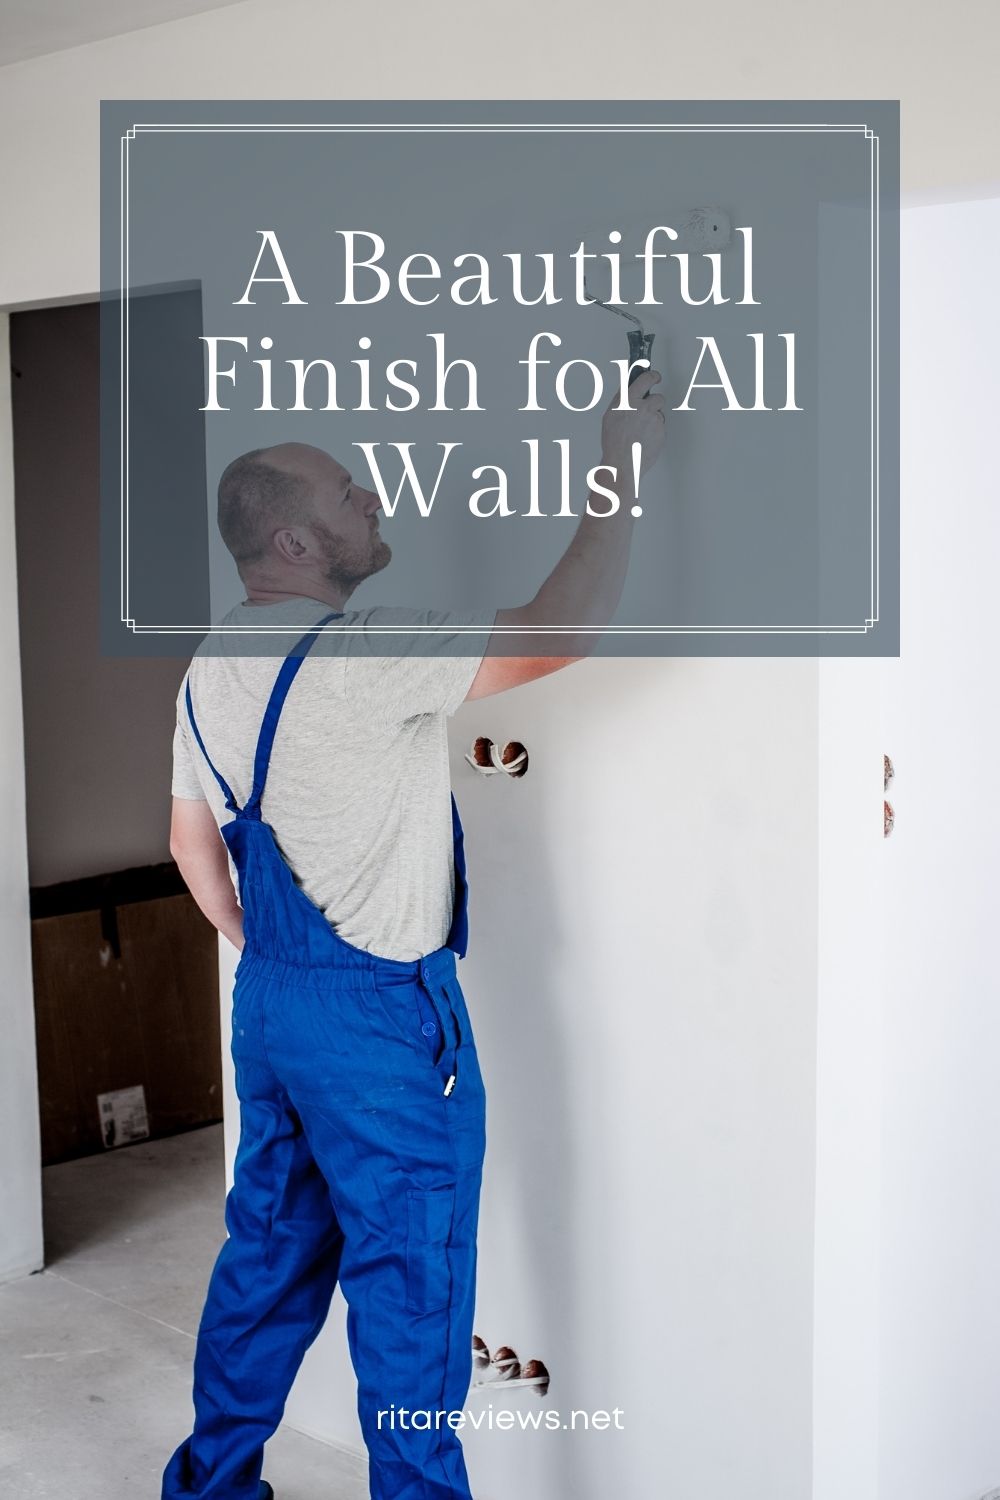 A Beautiful Finish for All Walls